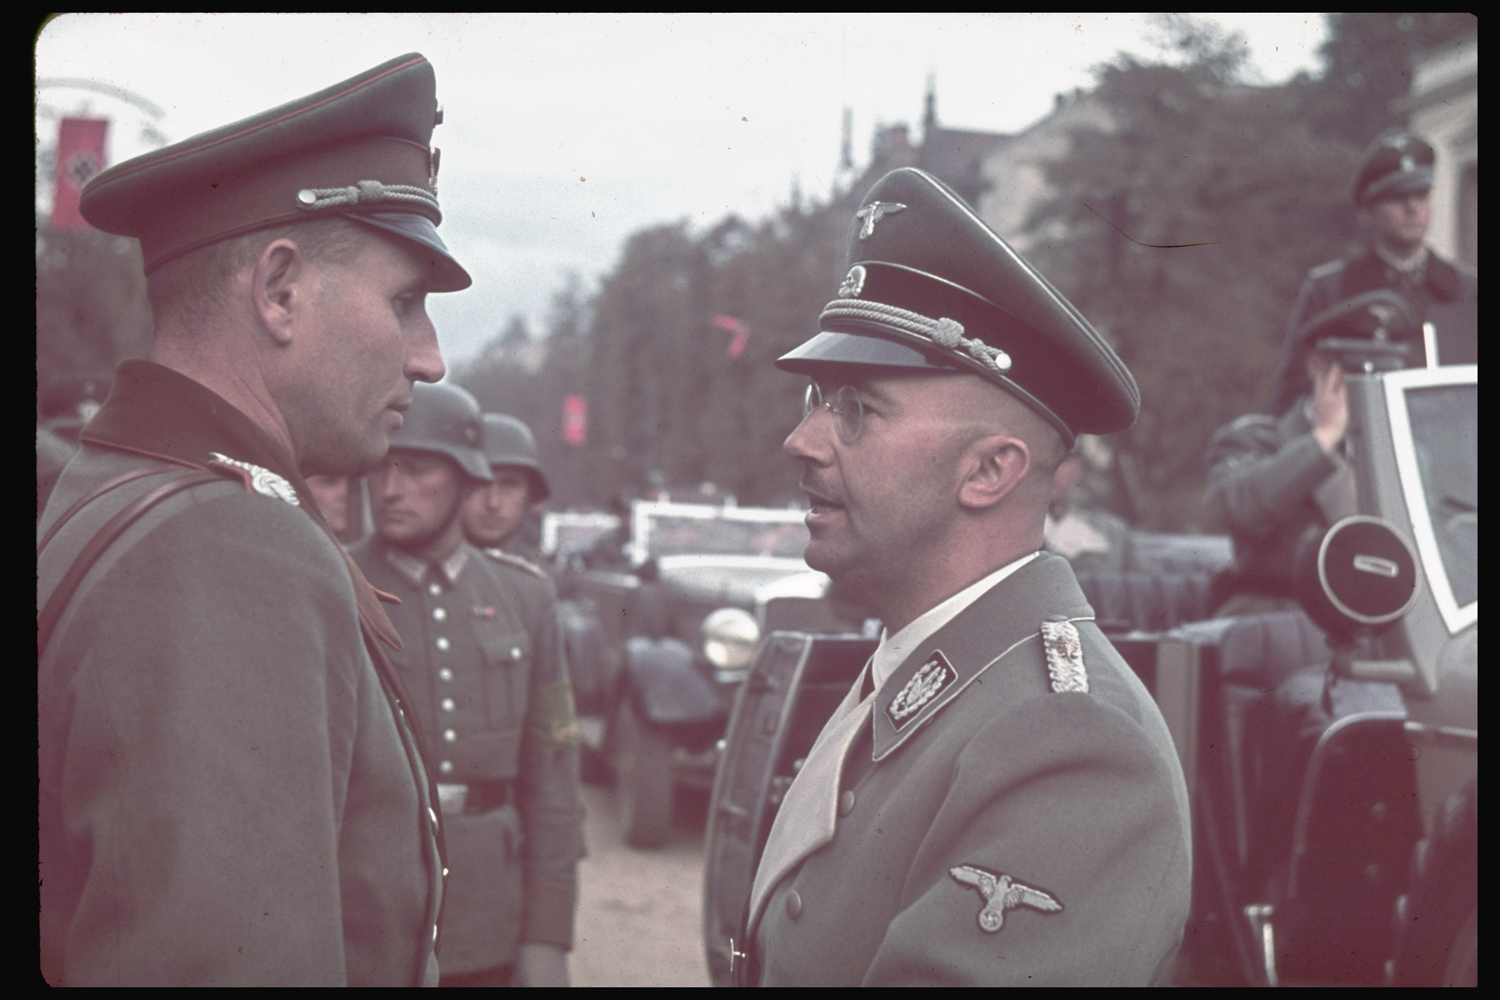 Head of the SS Heinrich Himmler (right), one of the chief architects of the Holocaust, speaks with an unidentified officer in Warsaw after German invasion of Poland, 1939.